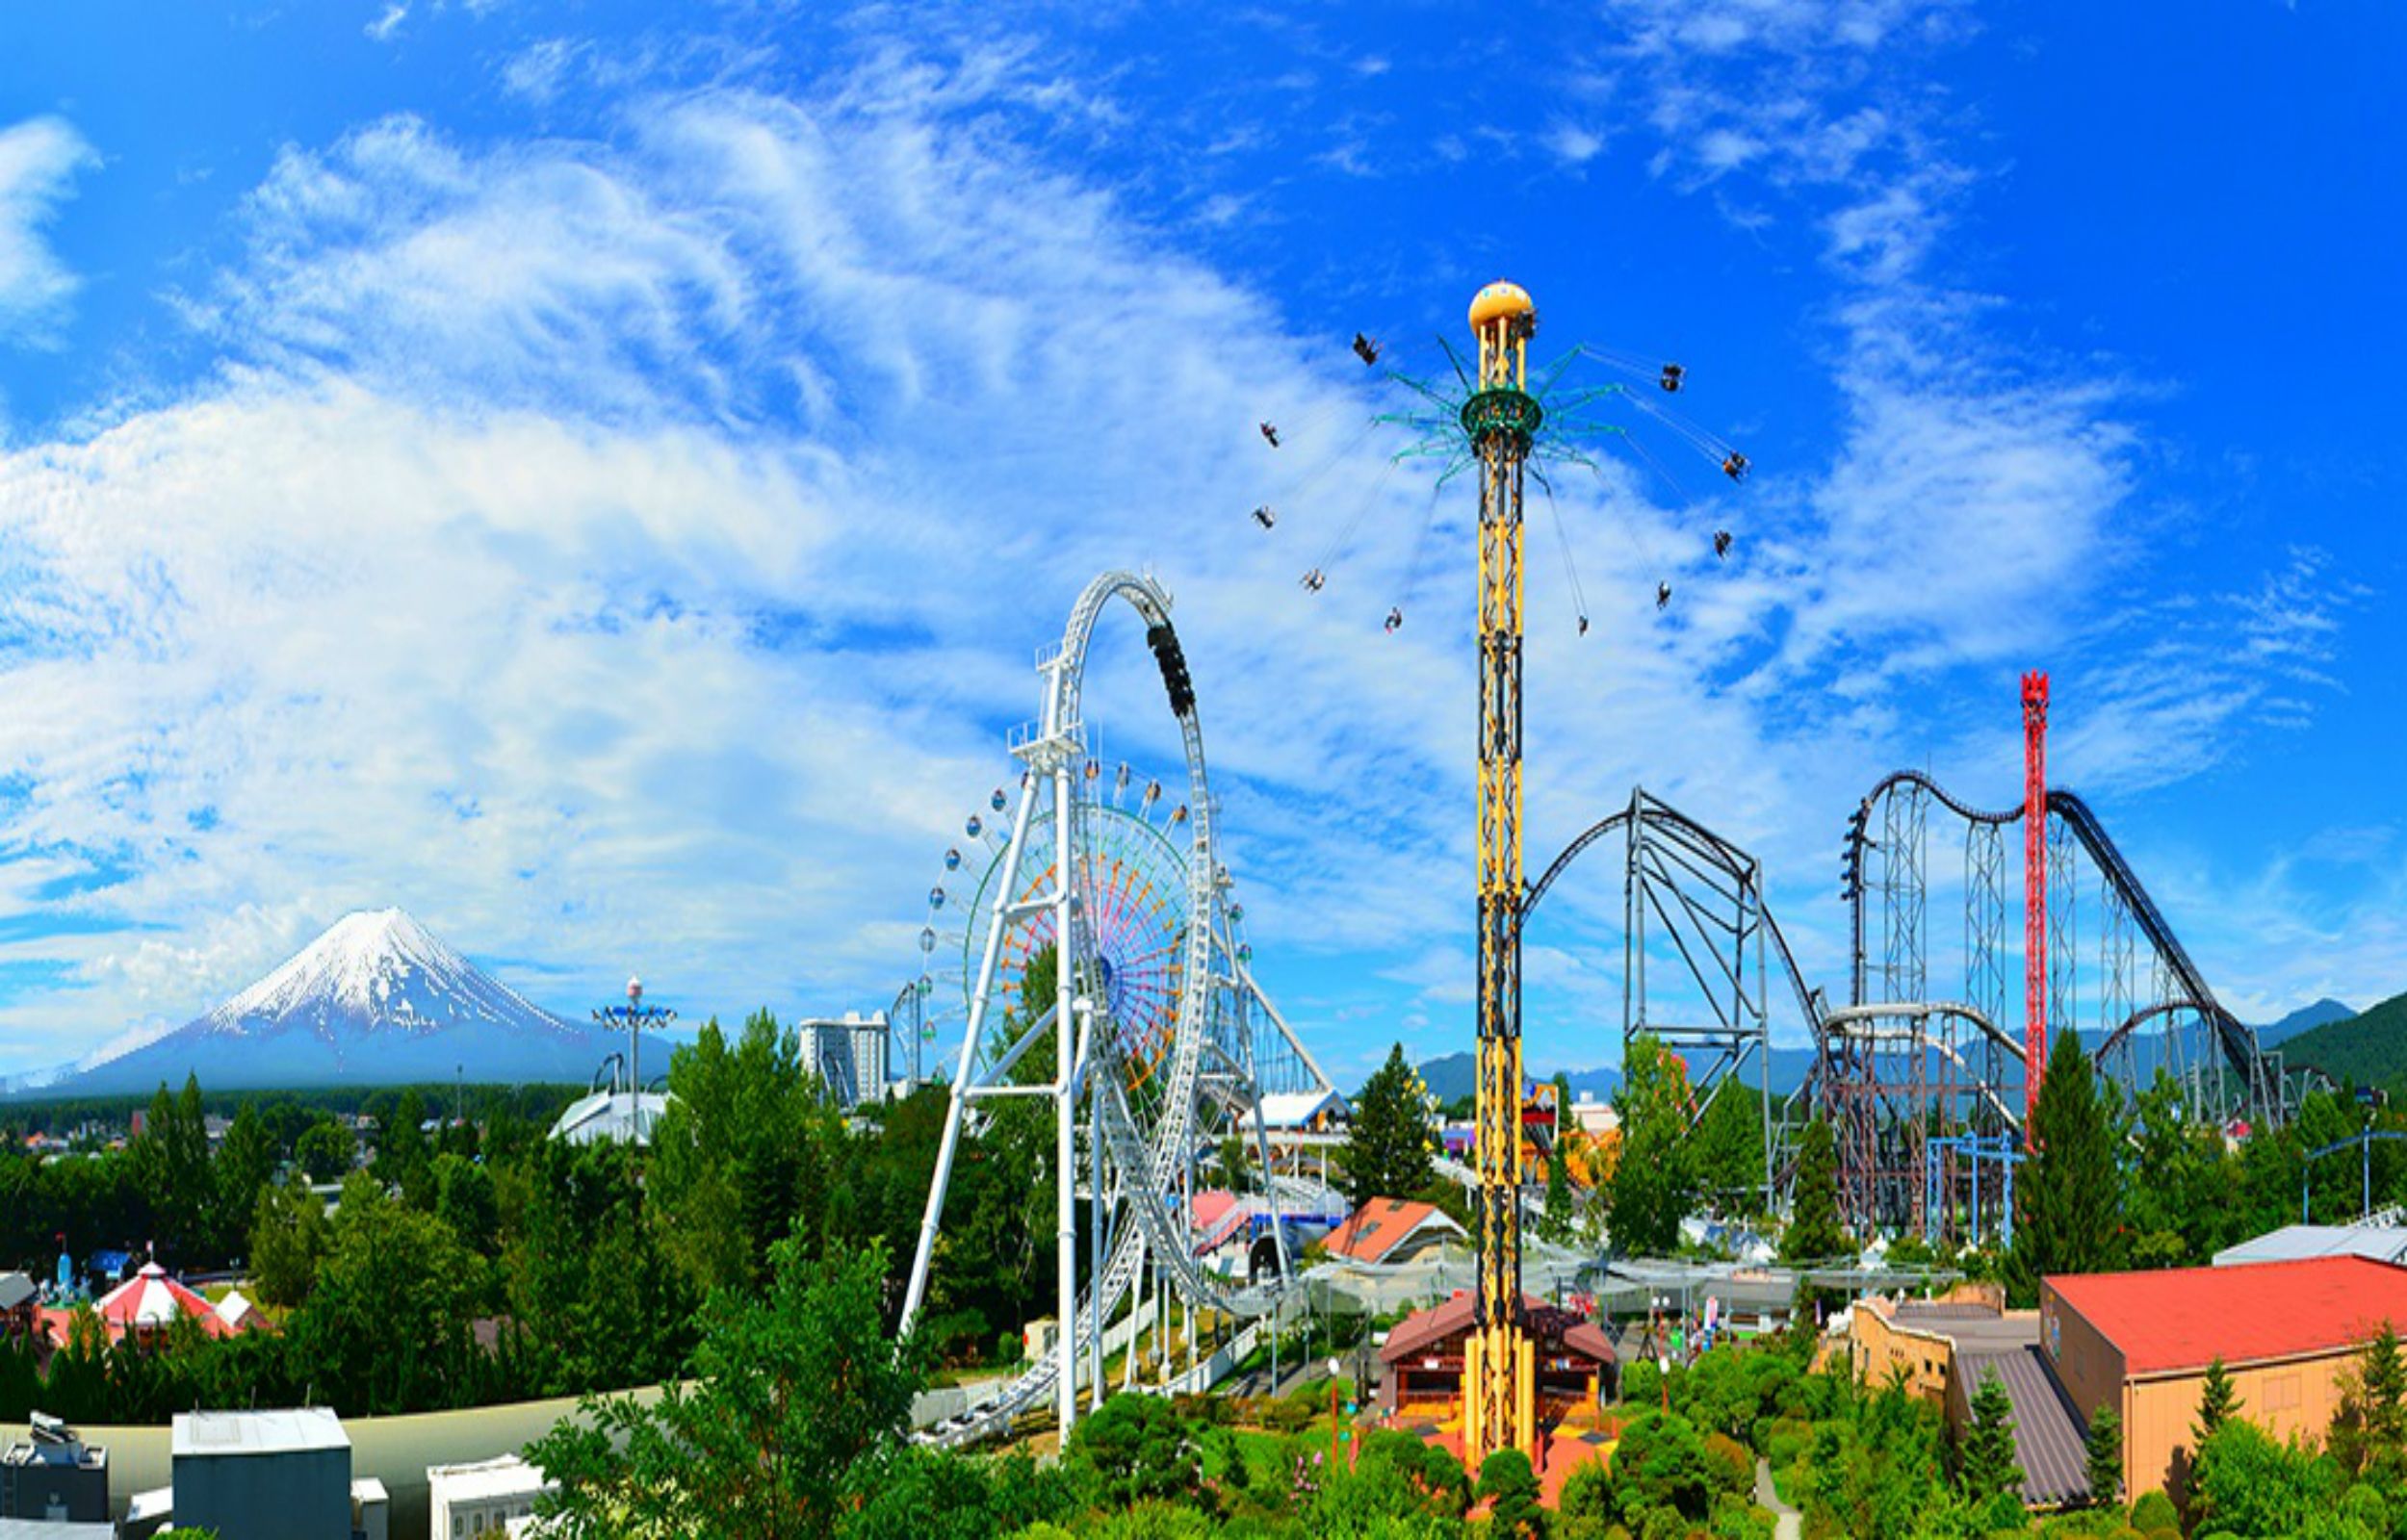 [For inbound travelers] Fuji-Q Highland Free Pass with Priority Admission (Early Park Admission)